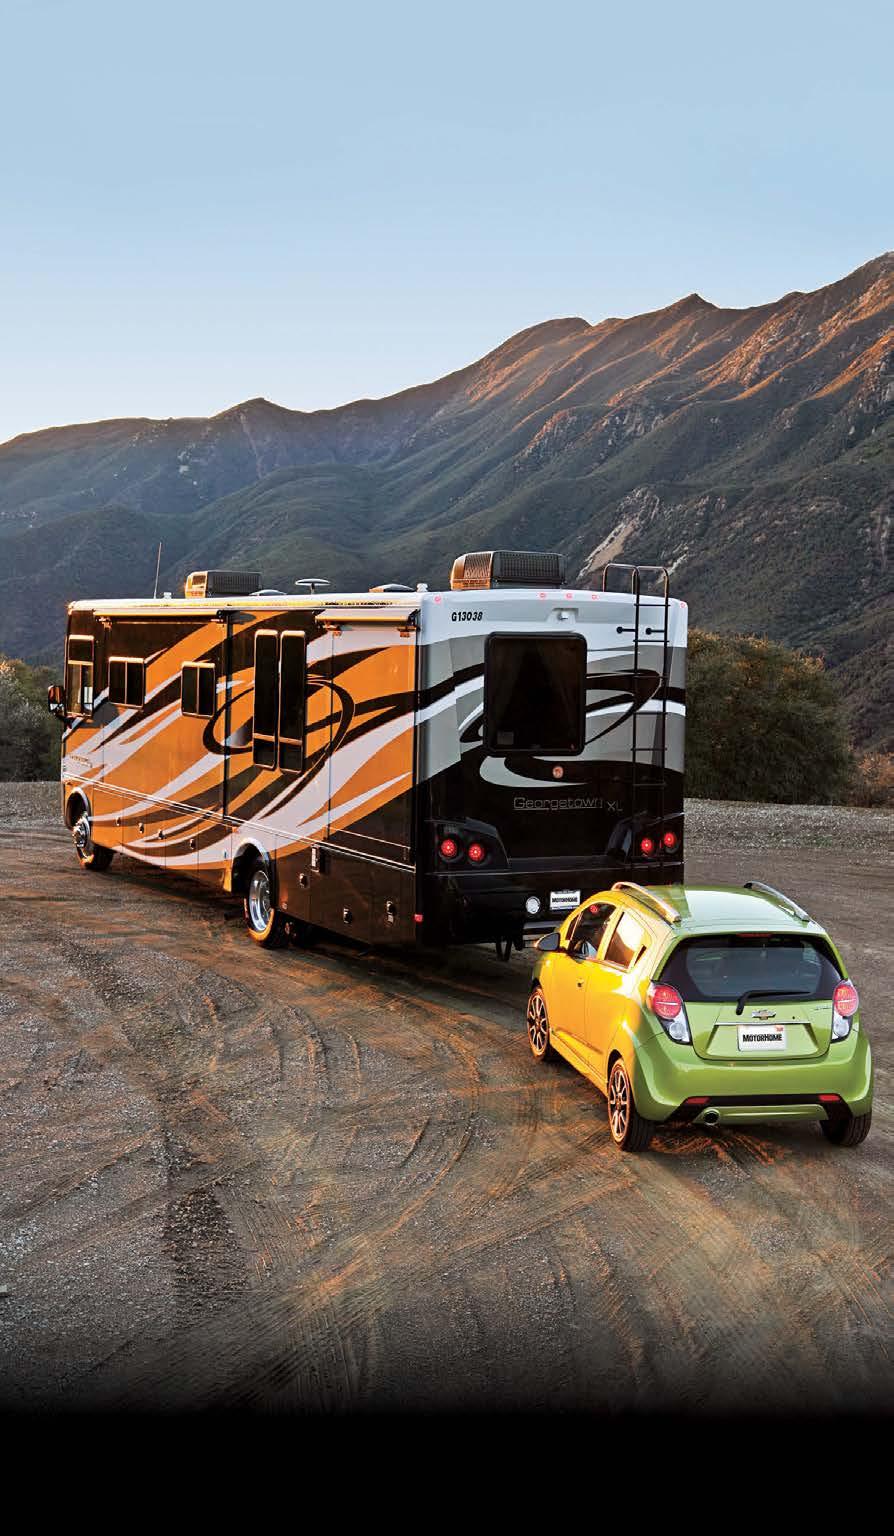 Contents 6 12 THINGS TO KNOW BEFORE YOU TOW Linking up with the proper equipment 2013 DINGHY ROUNDUP Our annual guide to manufacturerapproved flat-towable cars, trucks and SUVs 24 26 TOWING